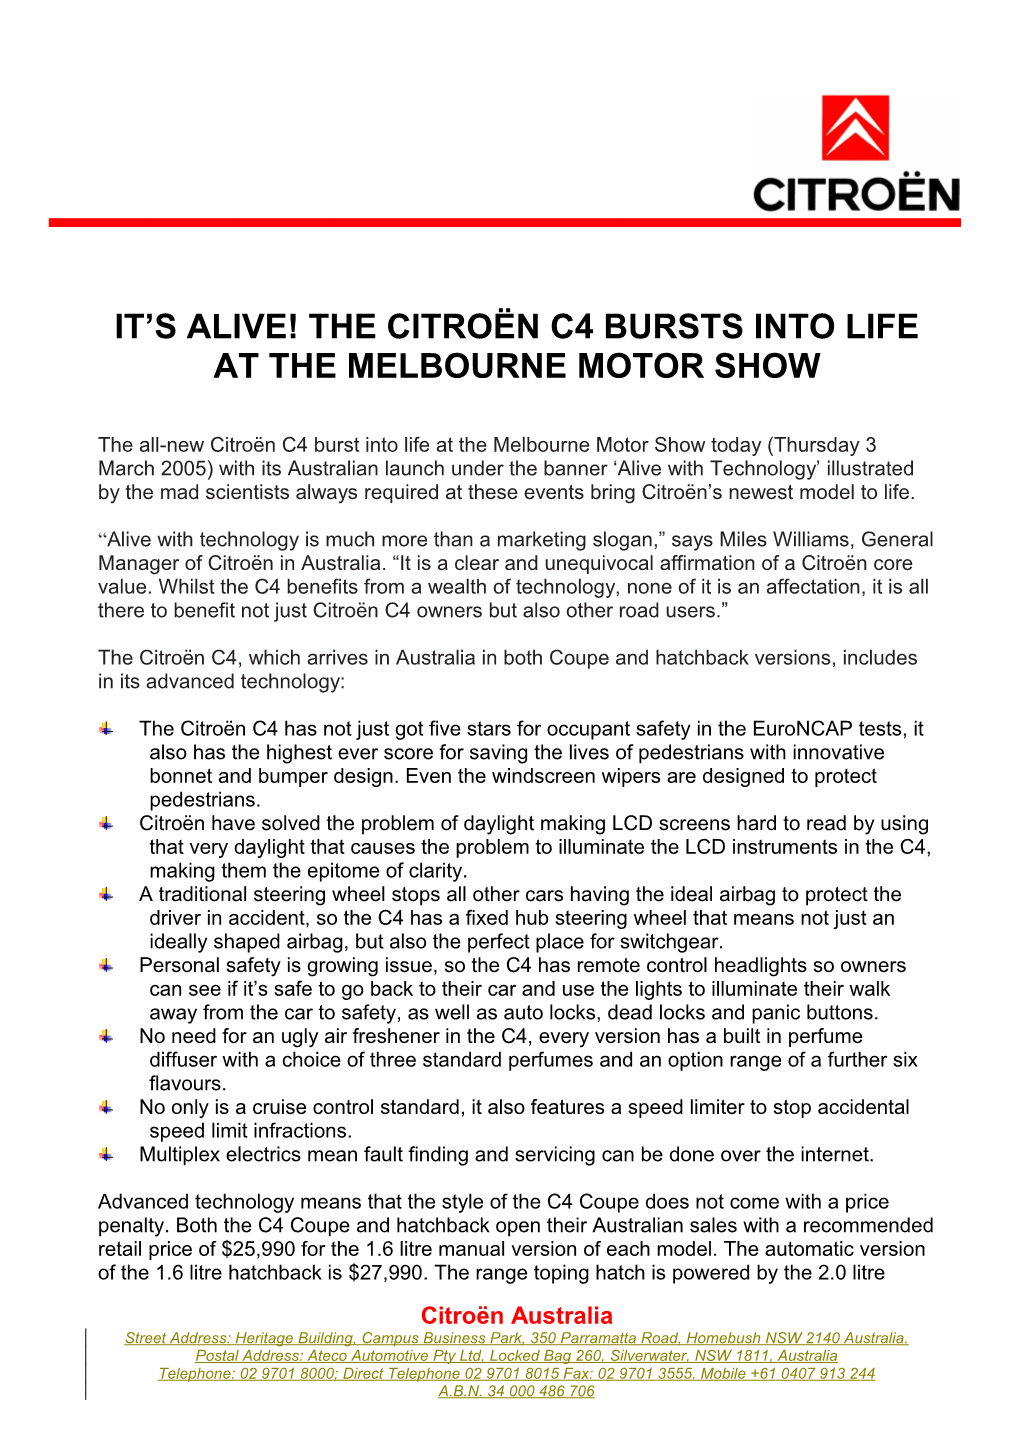 IT S ALIVE! the Citroën C4 BURSTS INTO LIFE at the MELBOURNE MOTOR SHOW